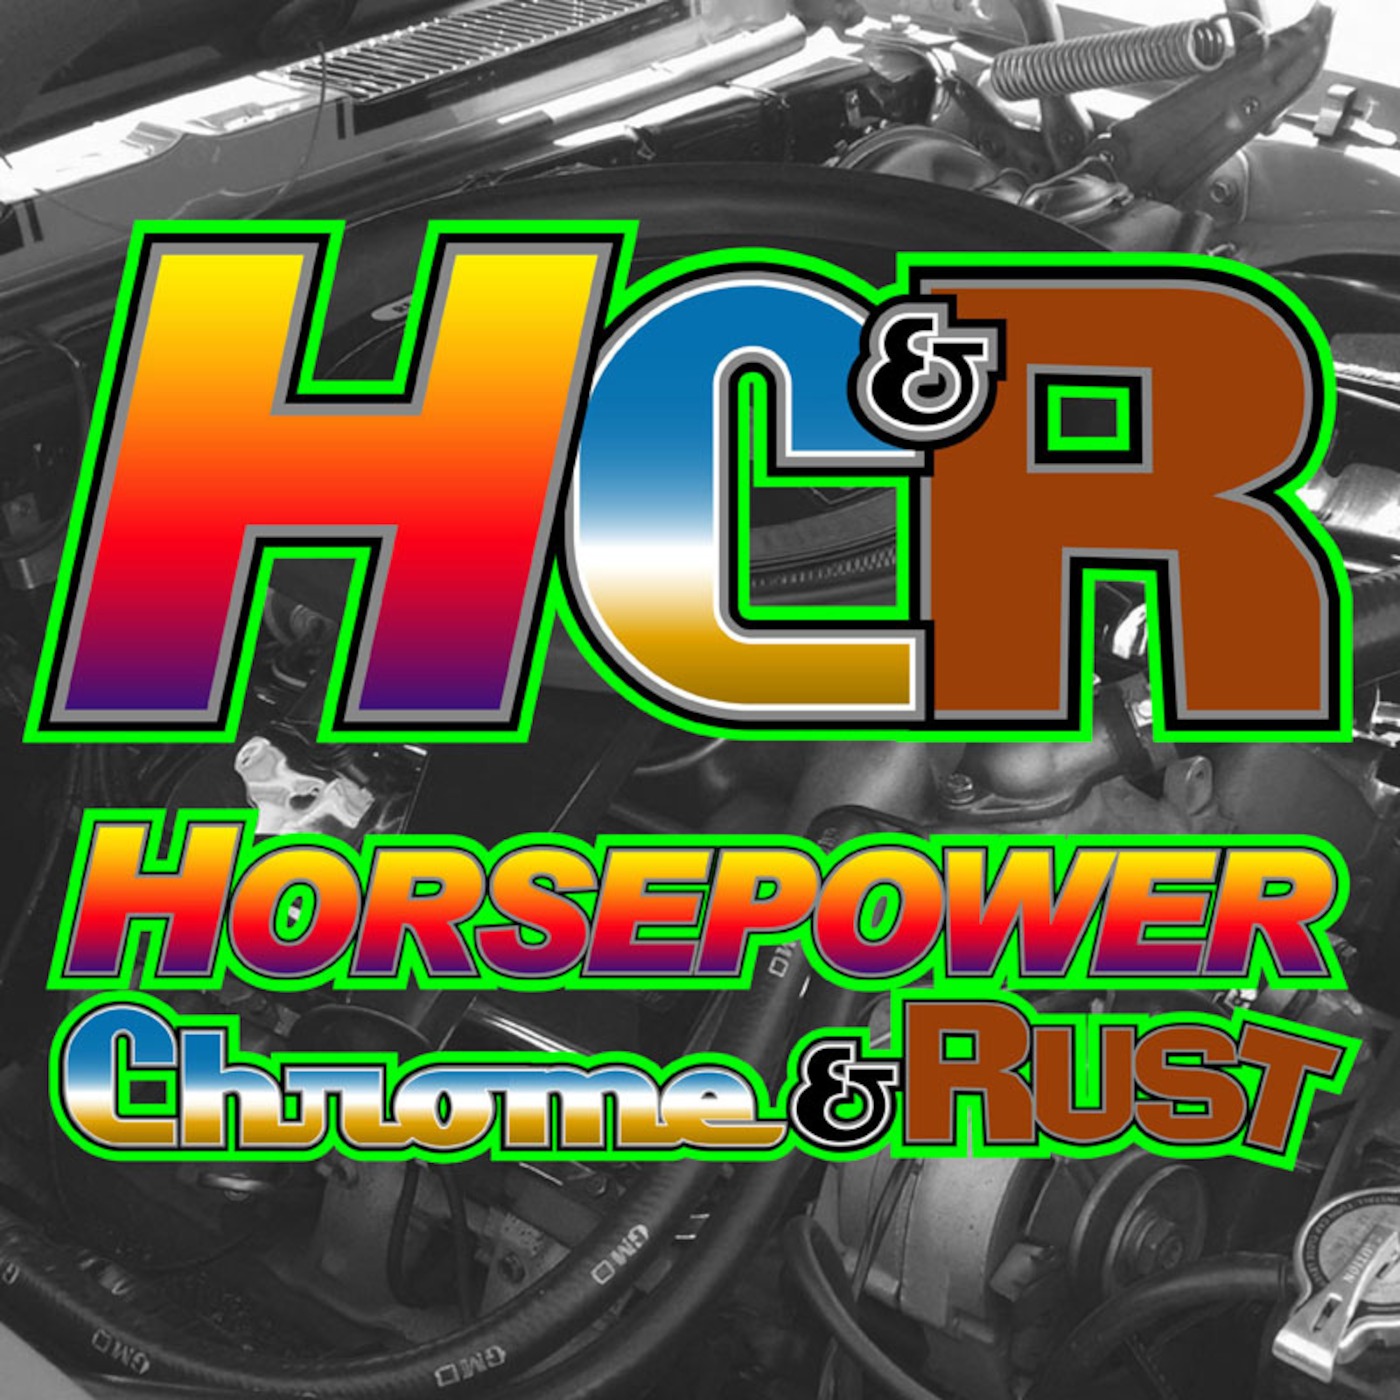 Horsepower Chrome and Rust EP109 Kevin Martin Interview & More Oct 30 2019